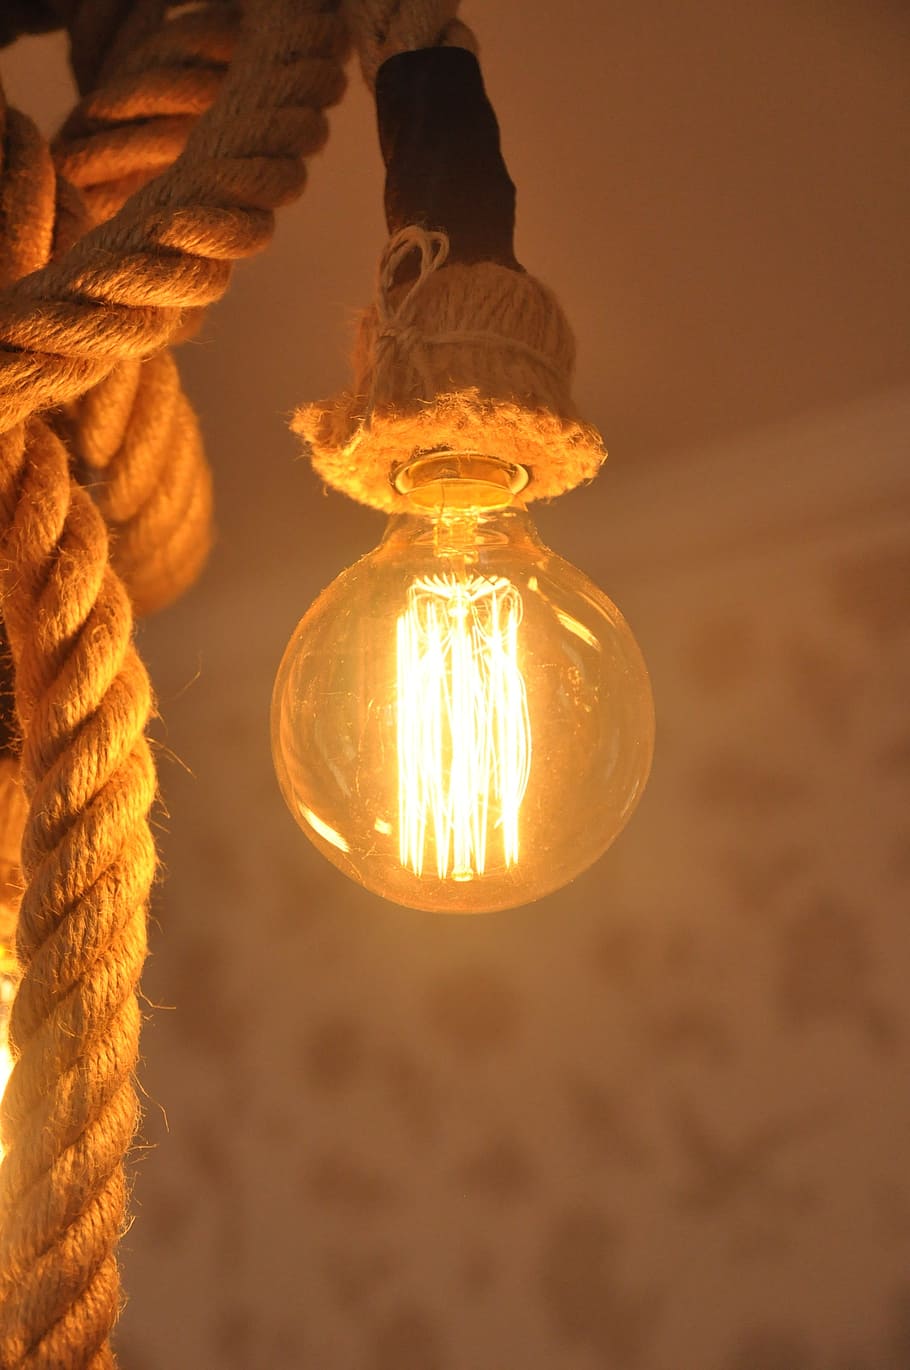 light, home, background, illuminated, lighting equipment, light bulb, close-up, electricity, glowing, focus on foreground